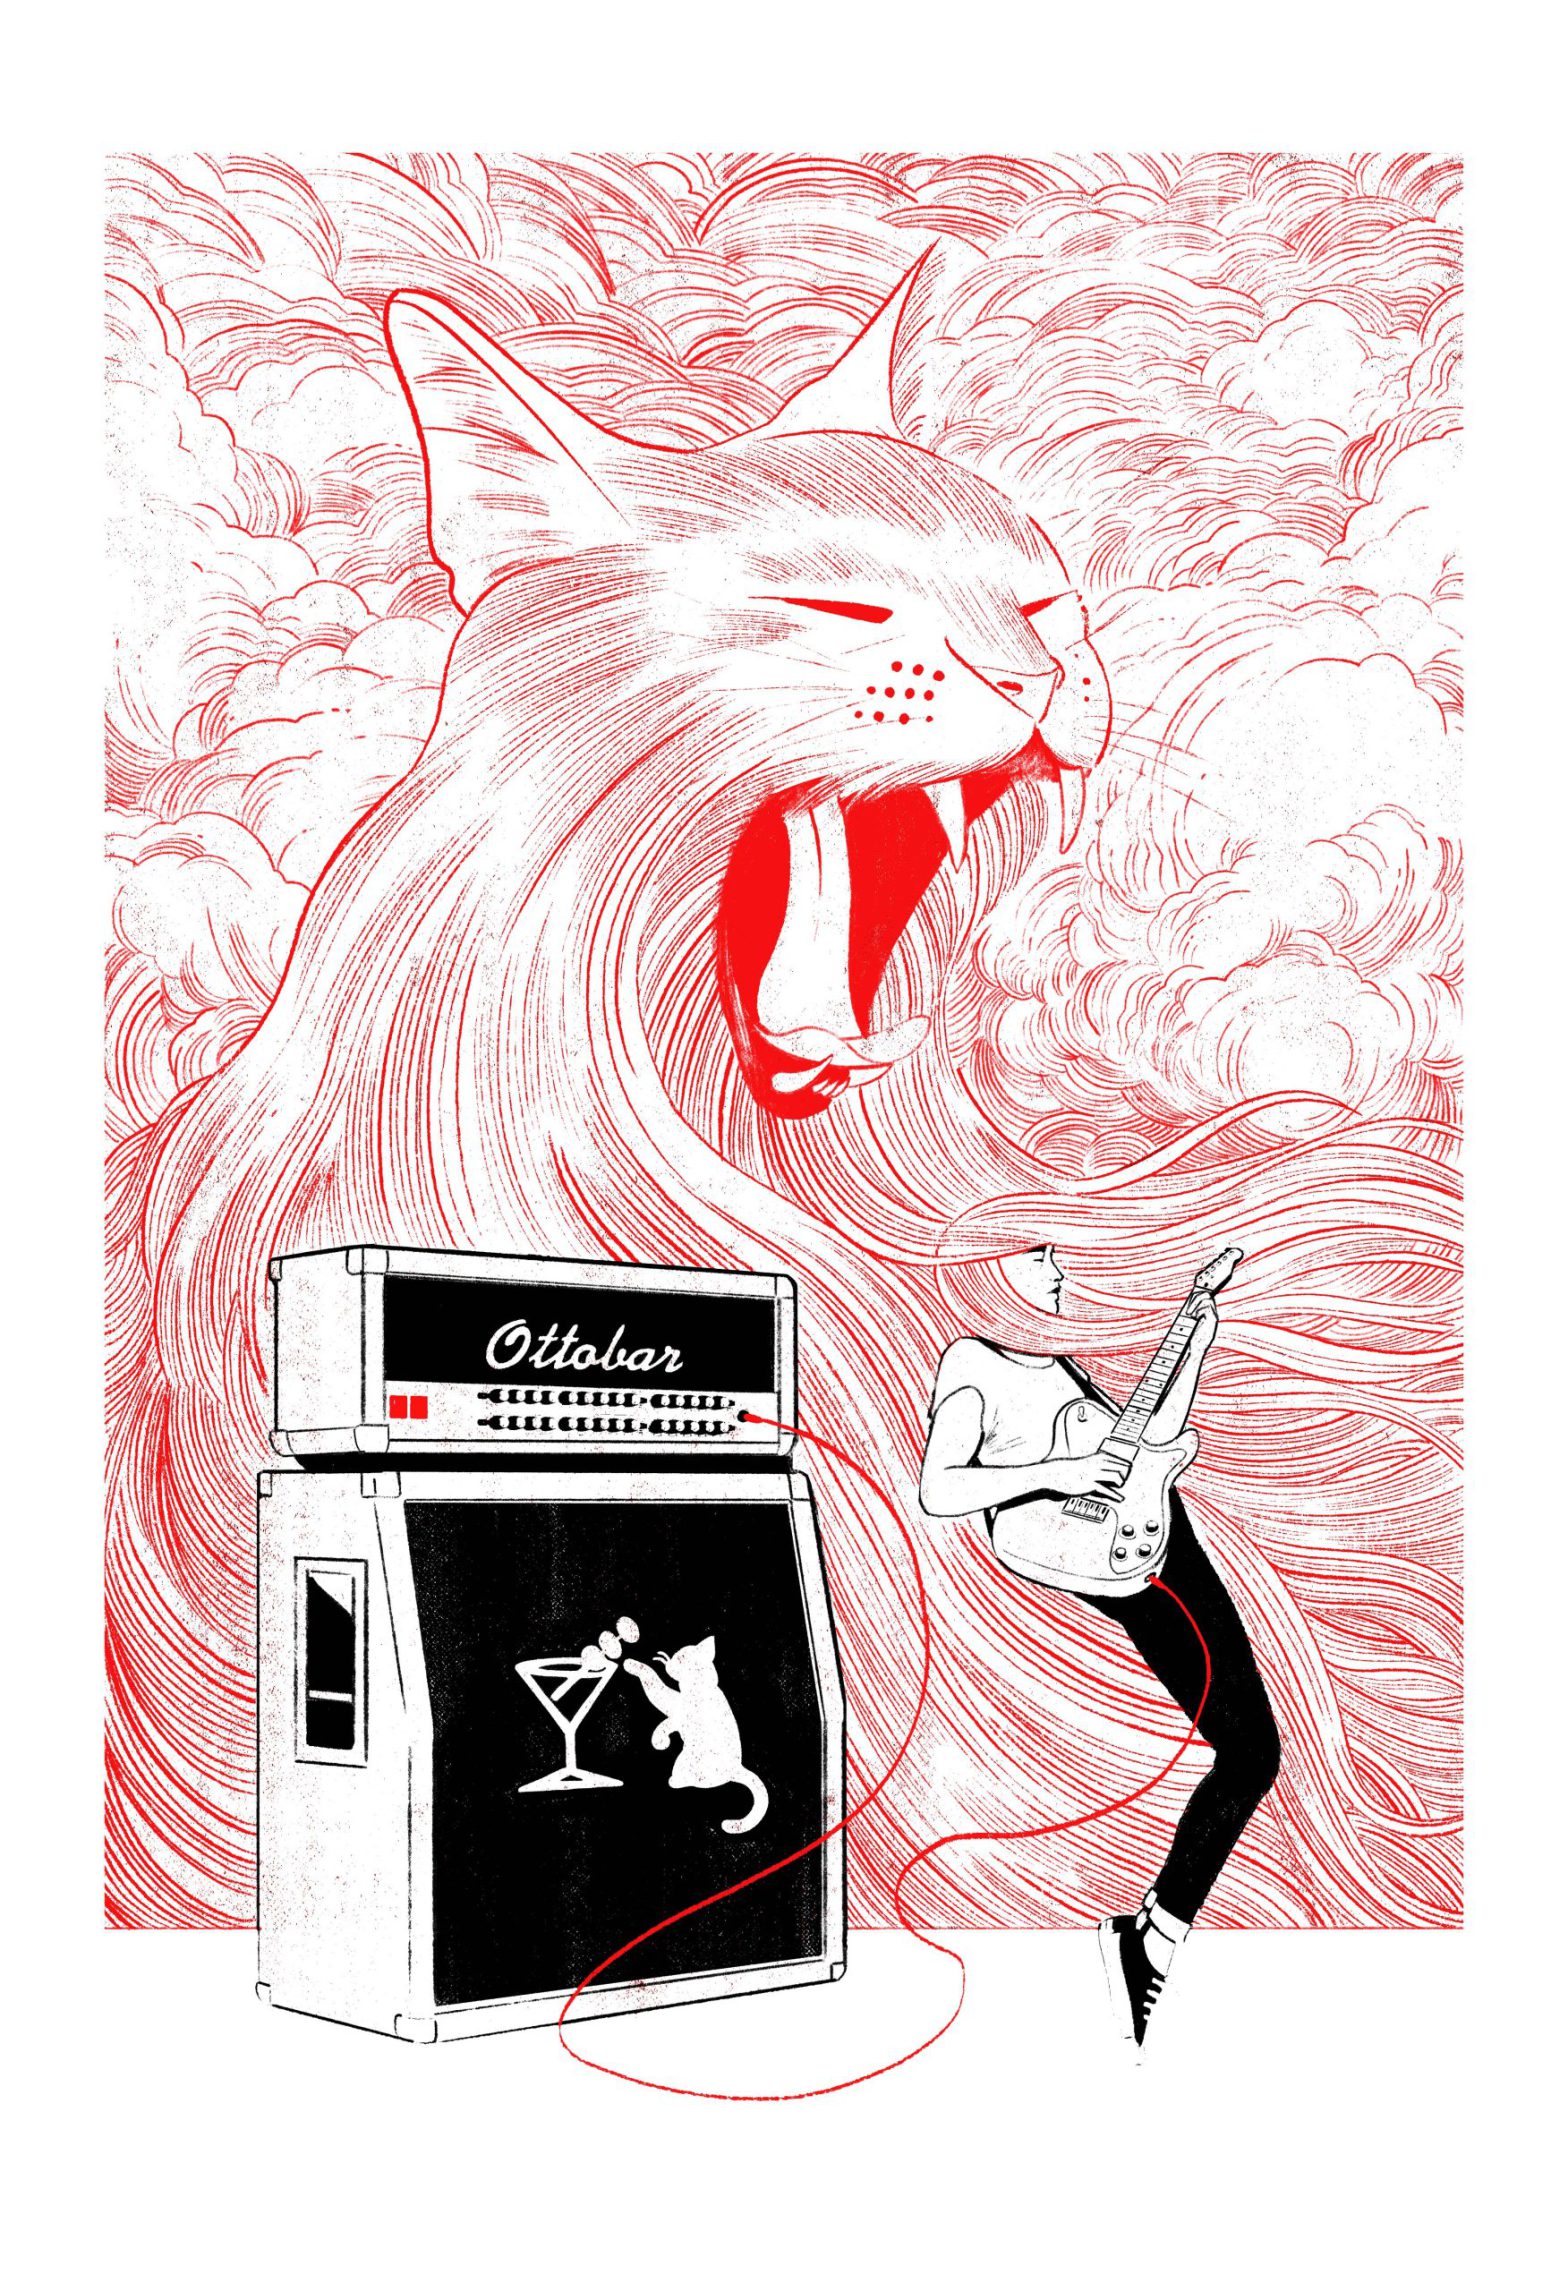 A huge red and white cat is drawn in a simple, cartooon-ish style, mid-yawn on a background of clouds. The cat's long fur flows into the hair of a person playing an electric guitar, who seems to be floating off of the ground, like they're being swept away by the music. Behind the guitarist is a half-stack amplifier with the name Ottobar on the head and the Ottobar's logo - a cat batting at a martini glass - silhouetted on the cabinet in black and white.